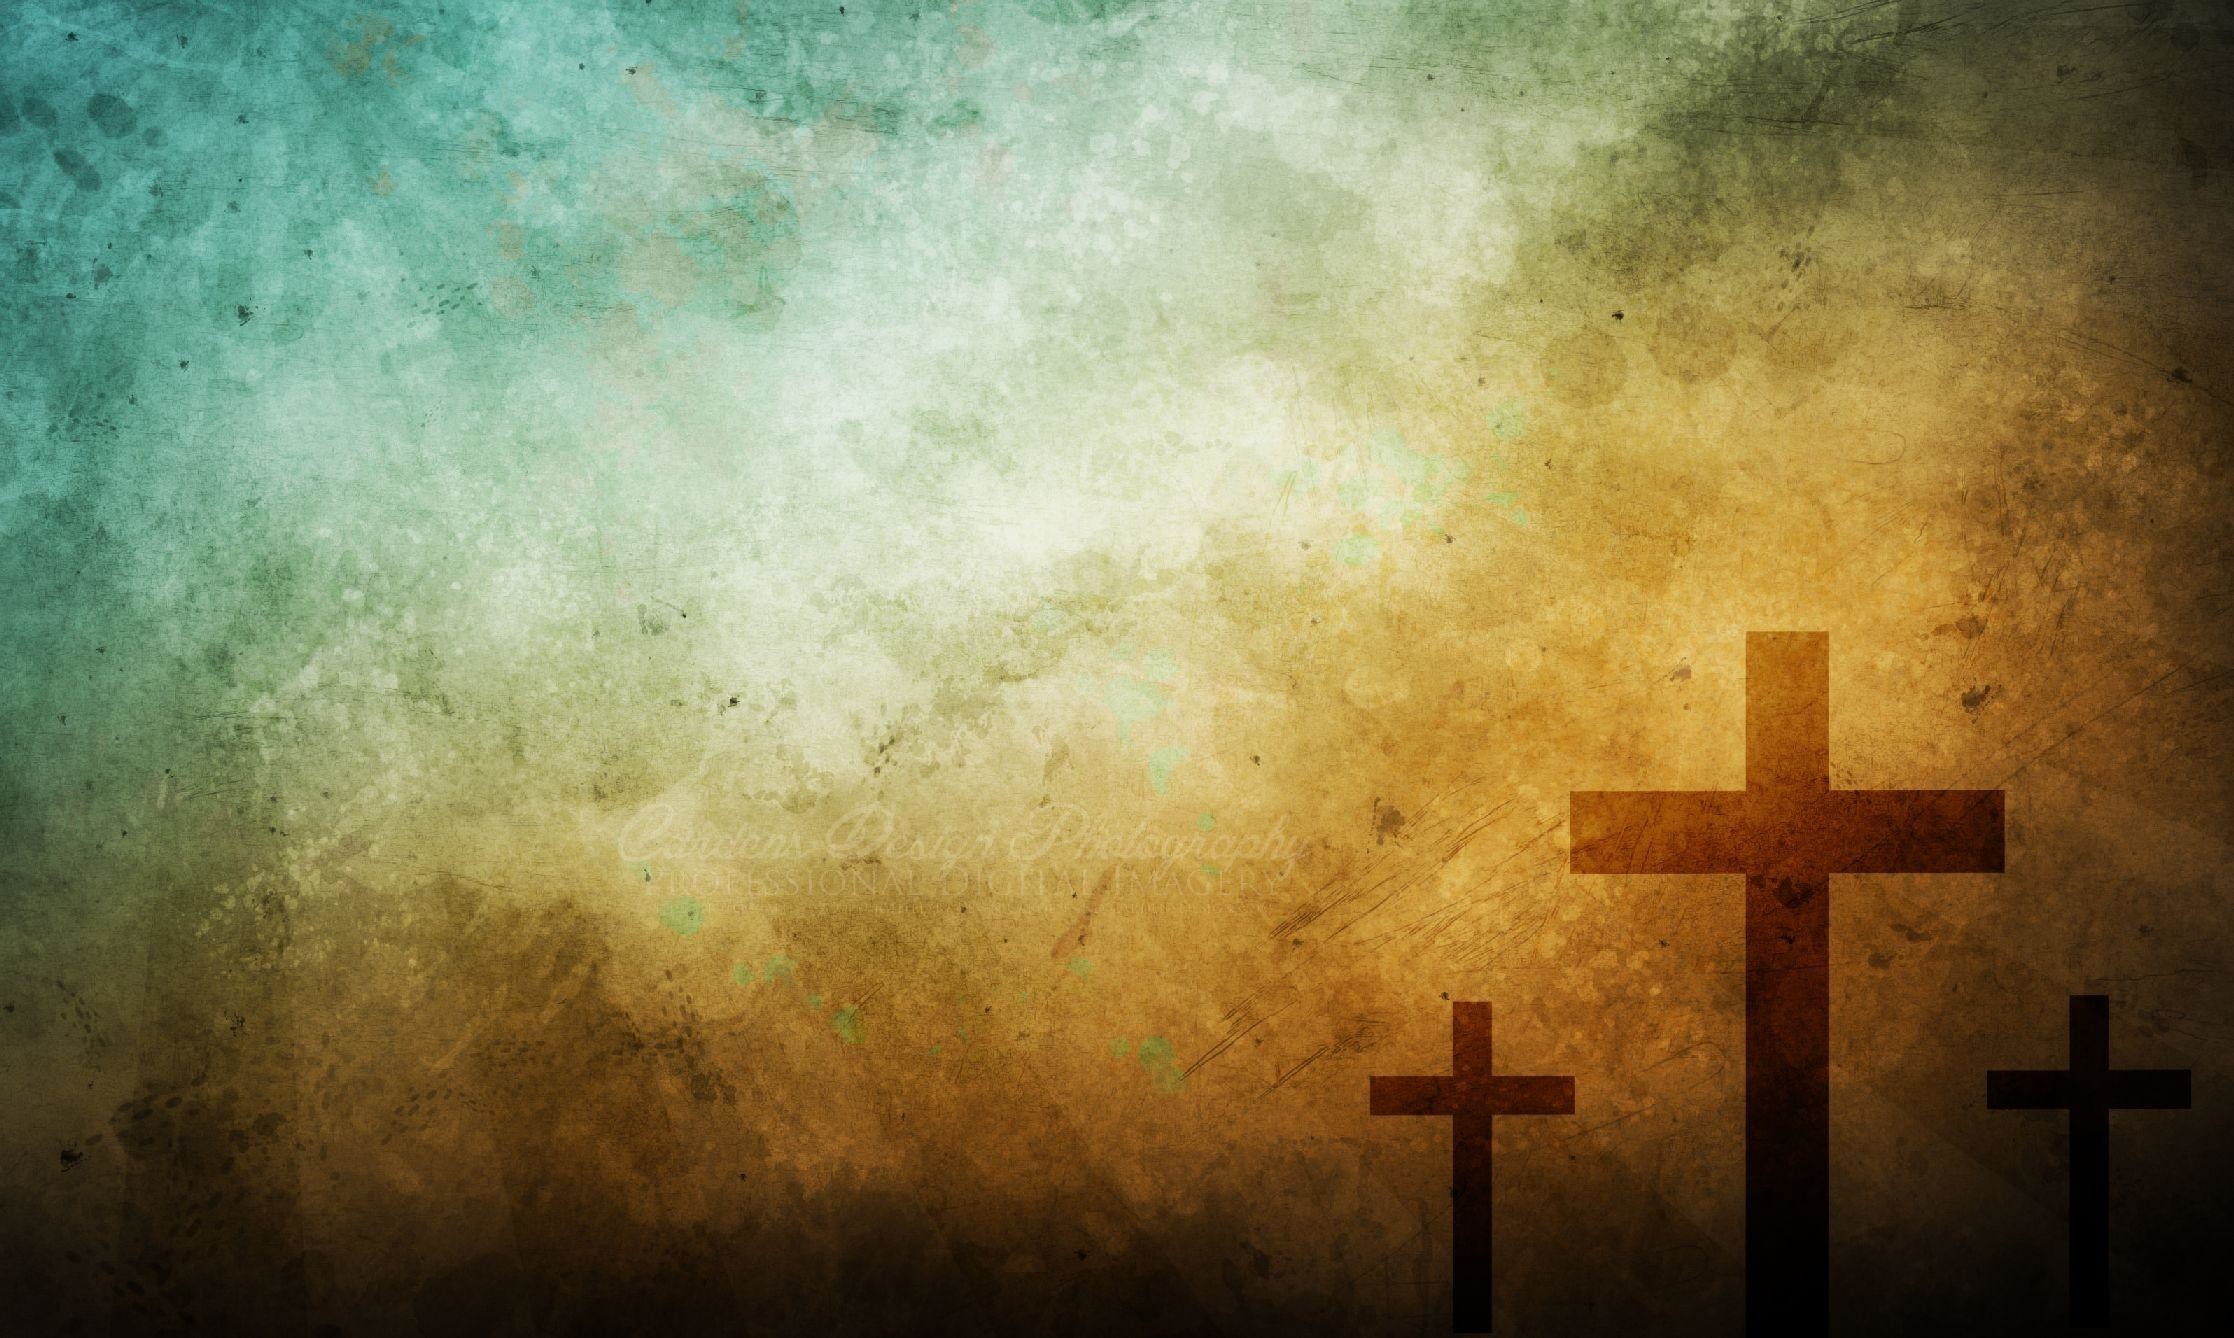 Free download 56 Religious Desktop Wallpapers on WallpaperPlay